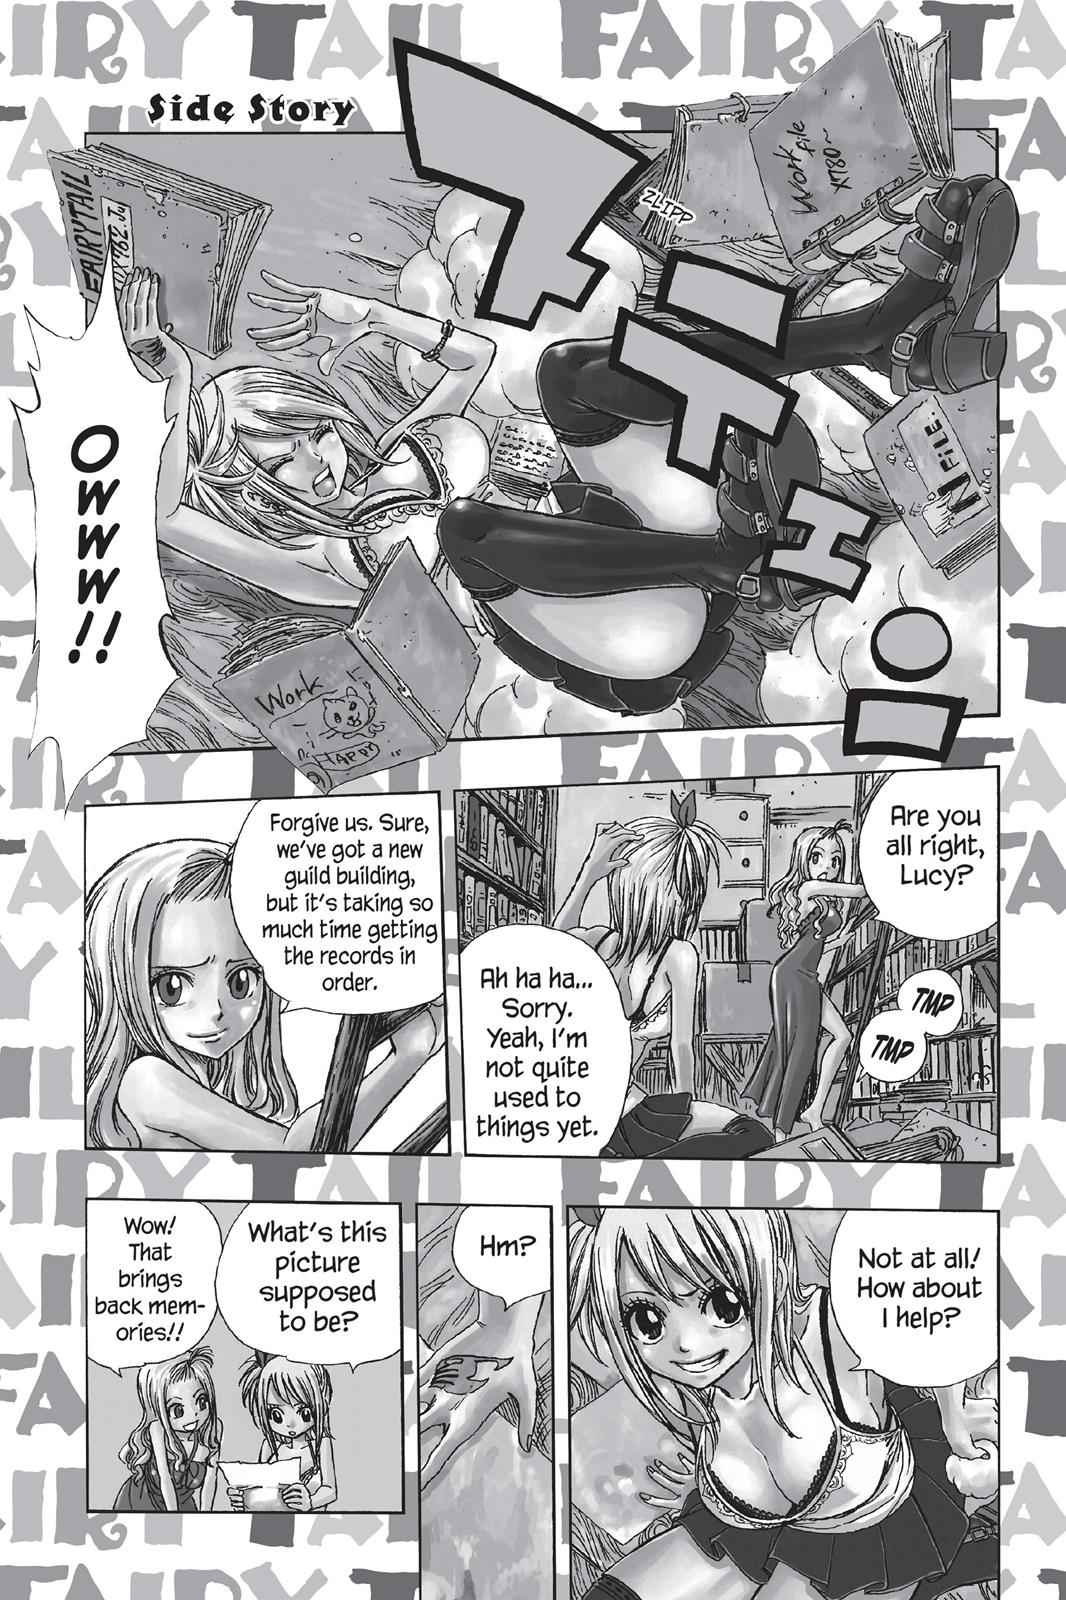  Chapter 126.5 image 001